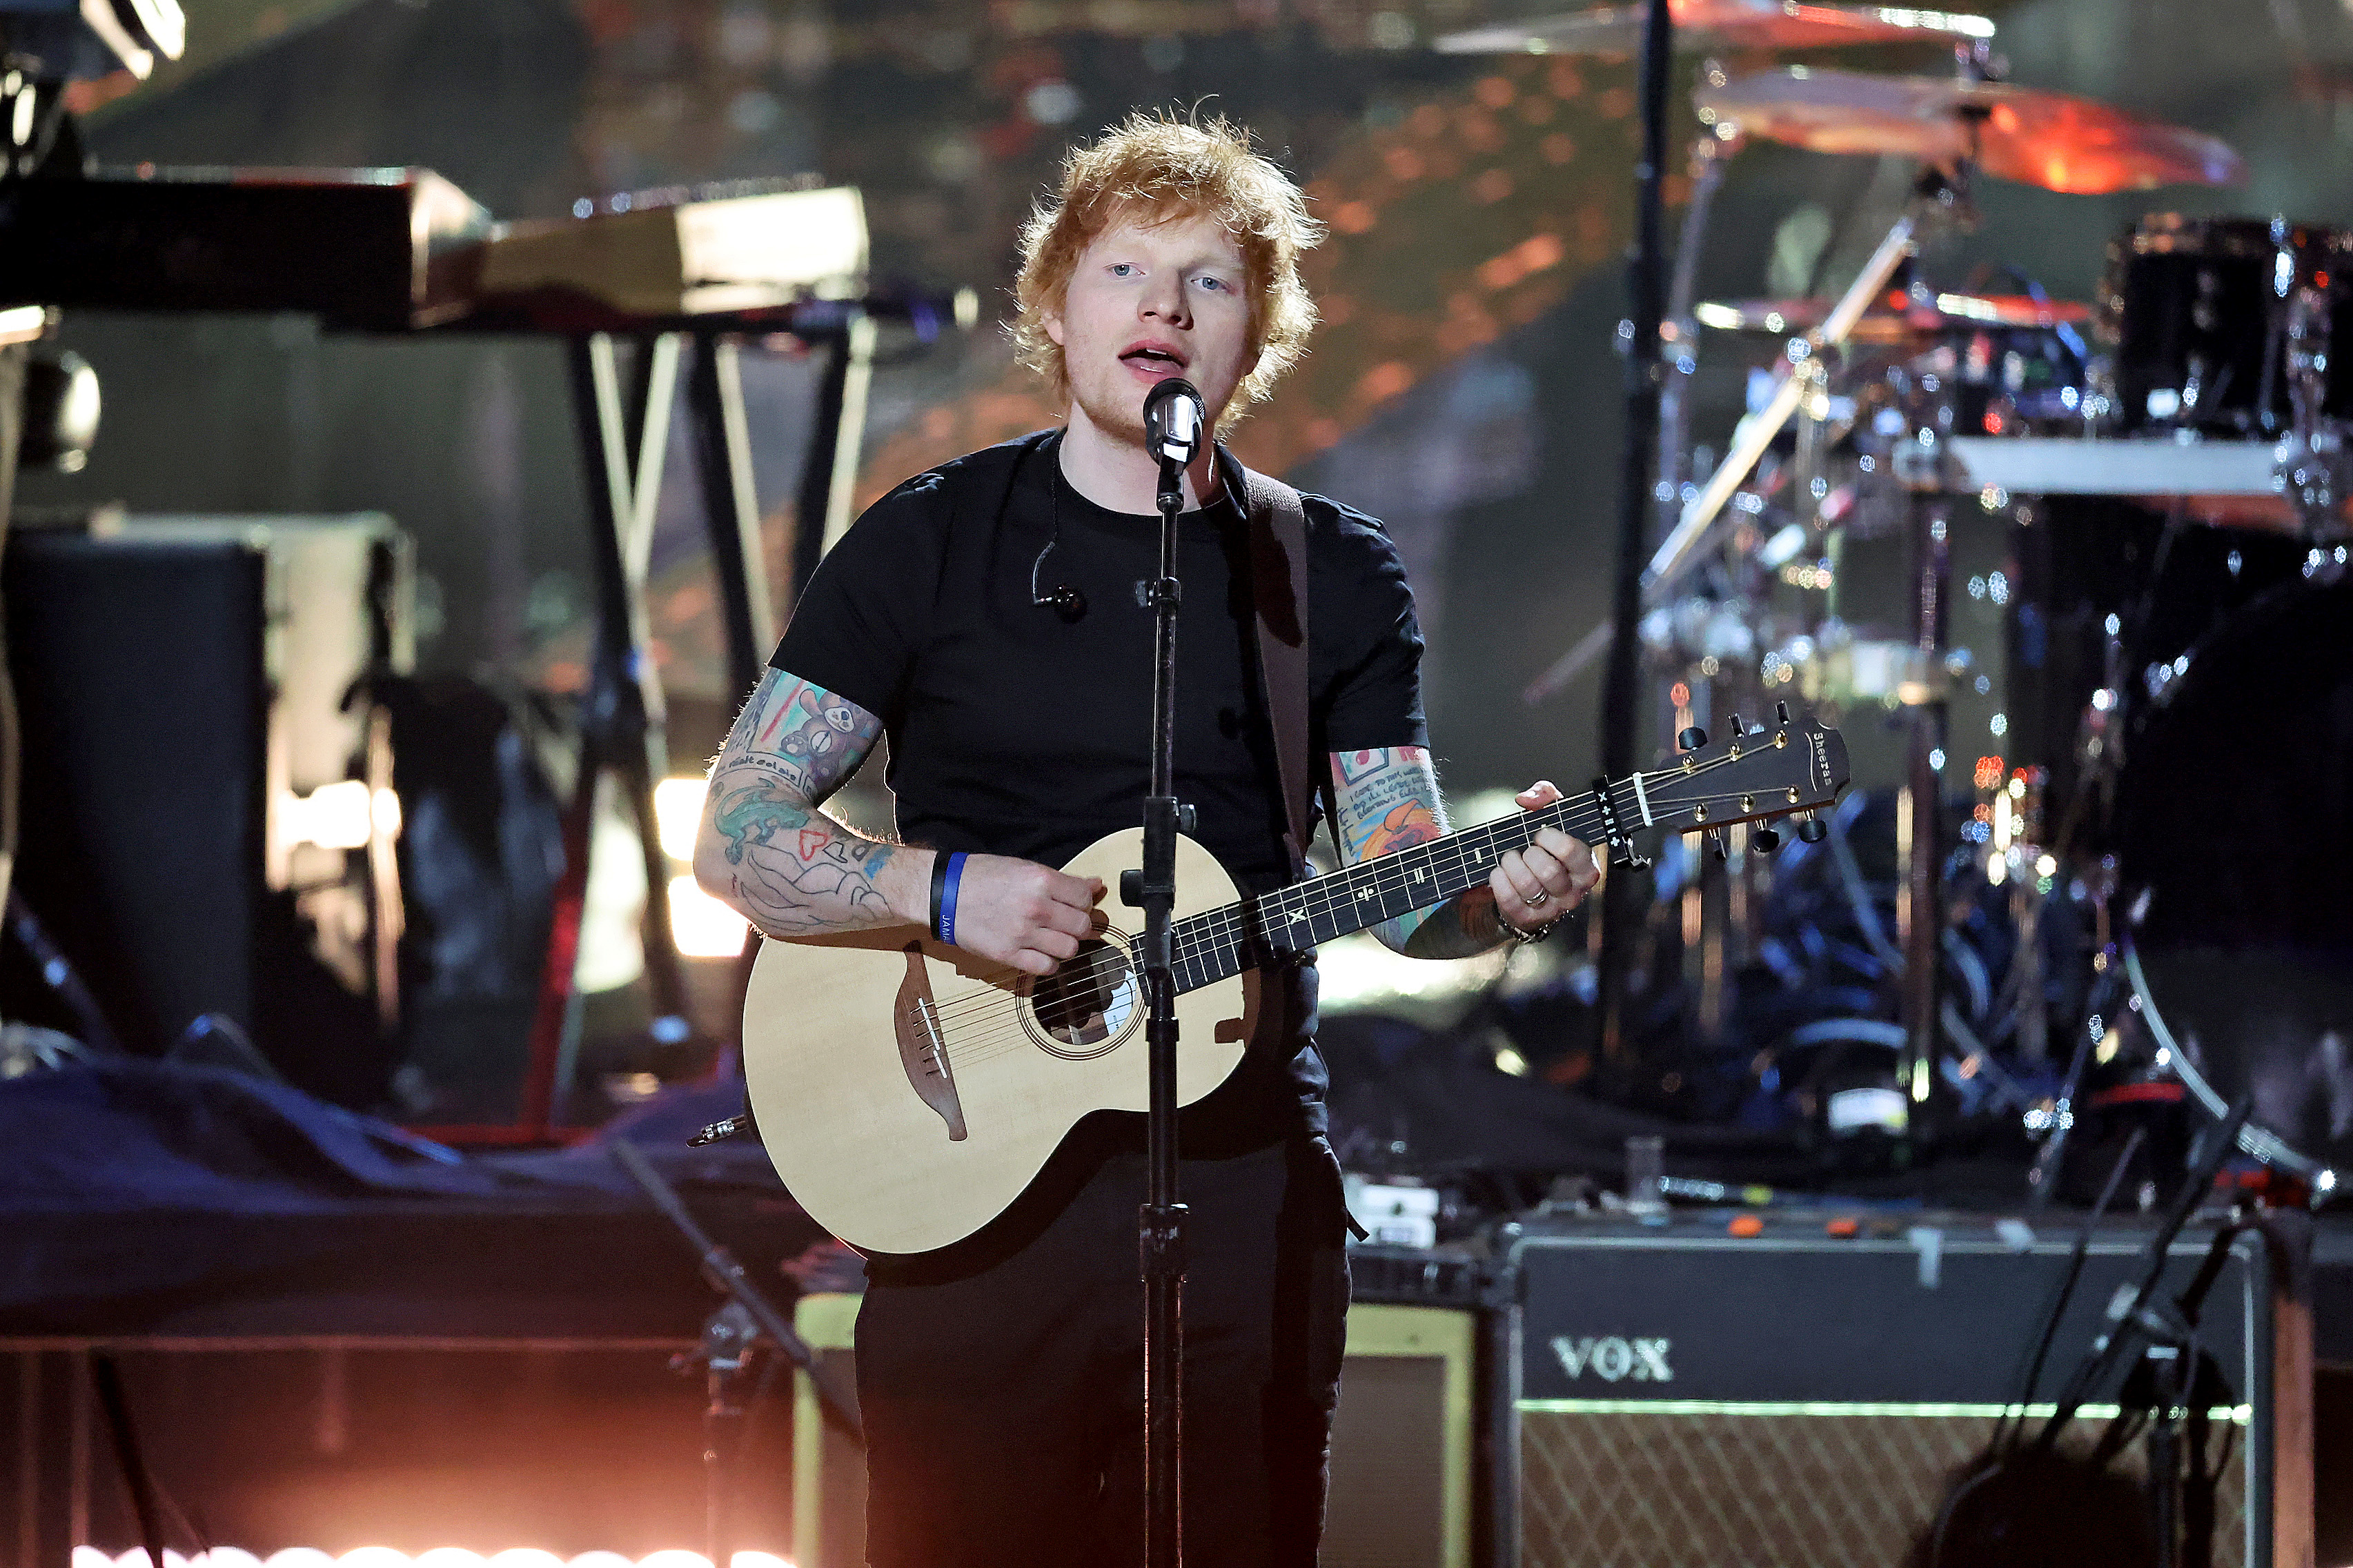 Is Ed Sheeran the answer you're looking for?